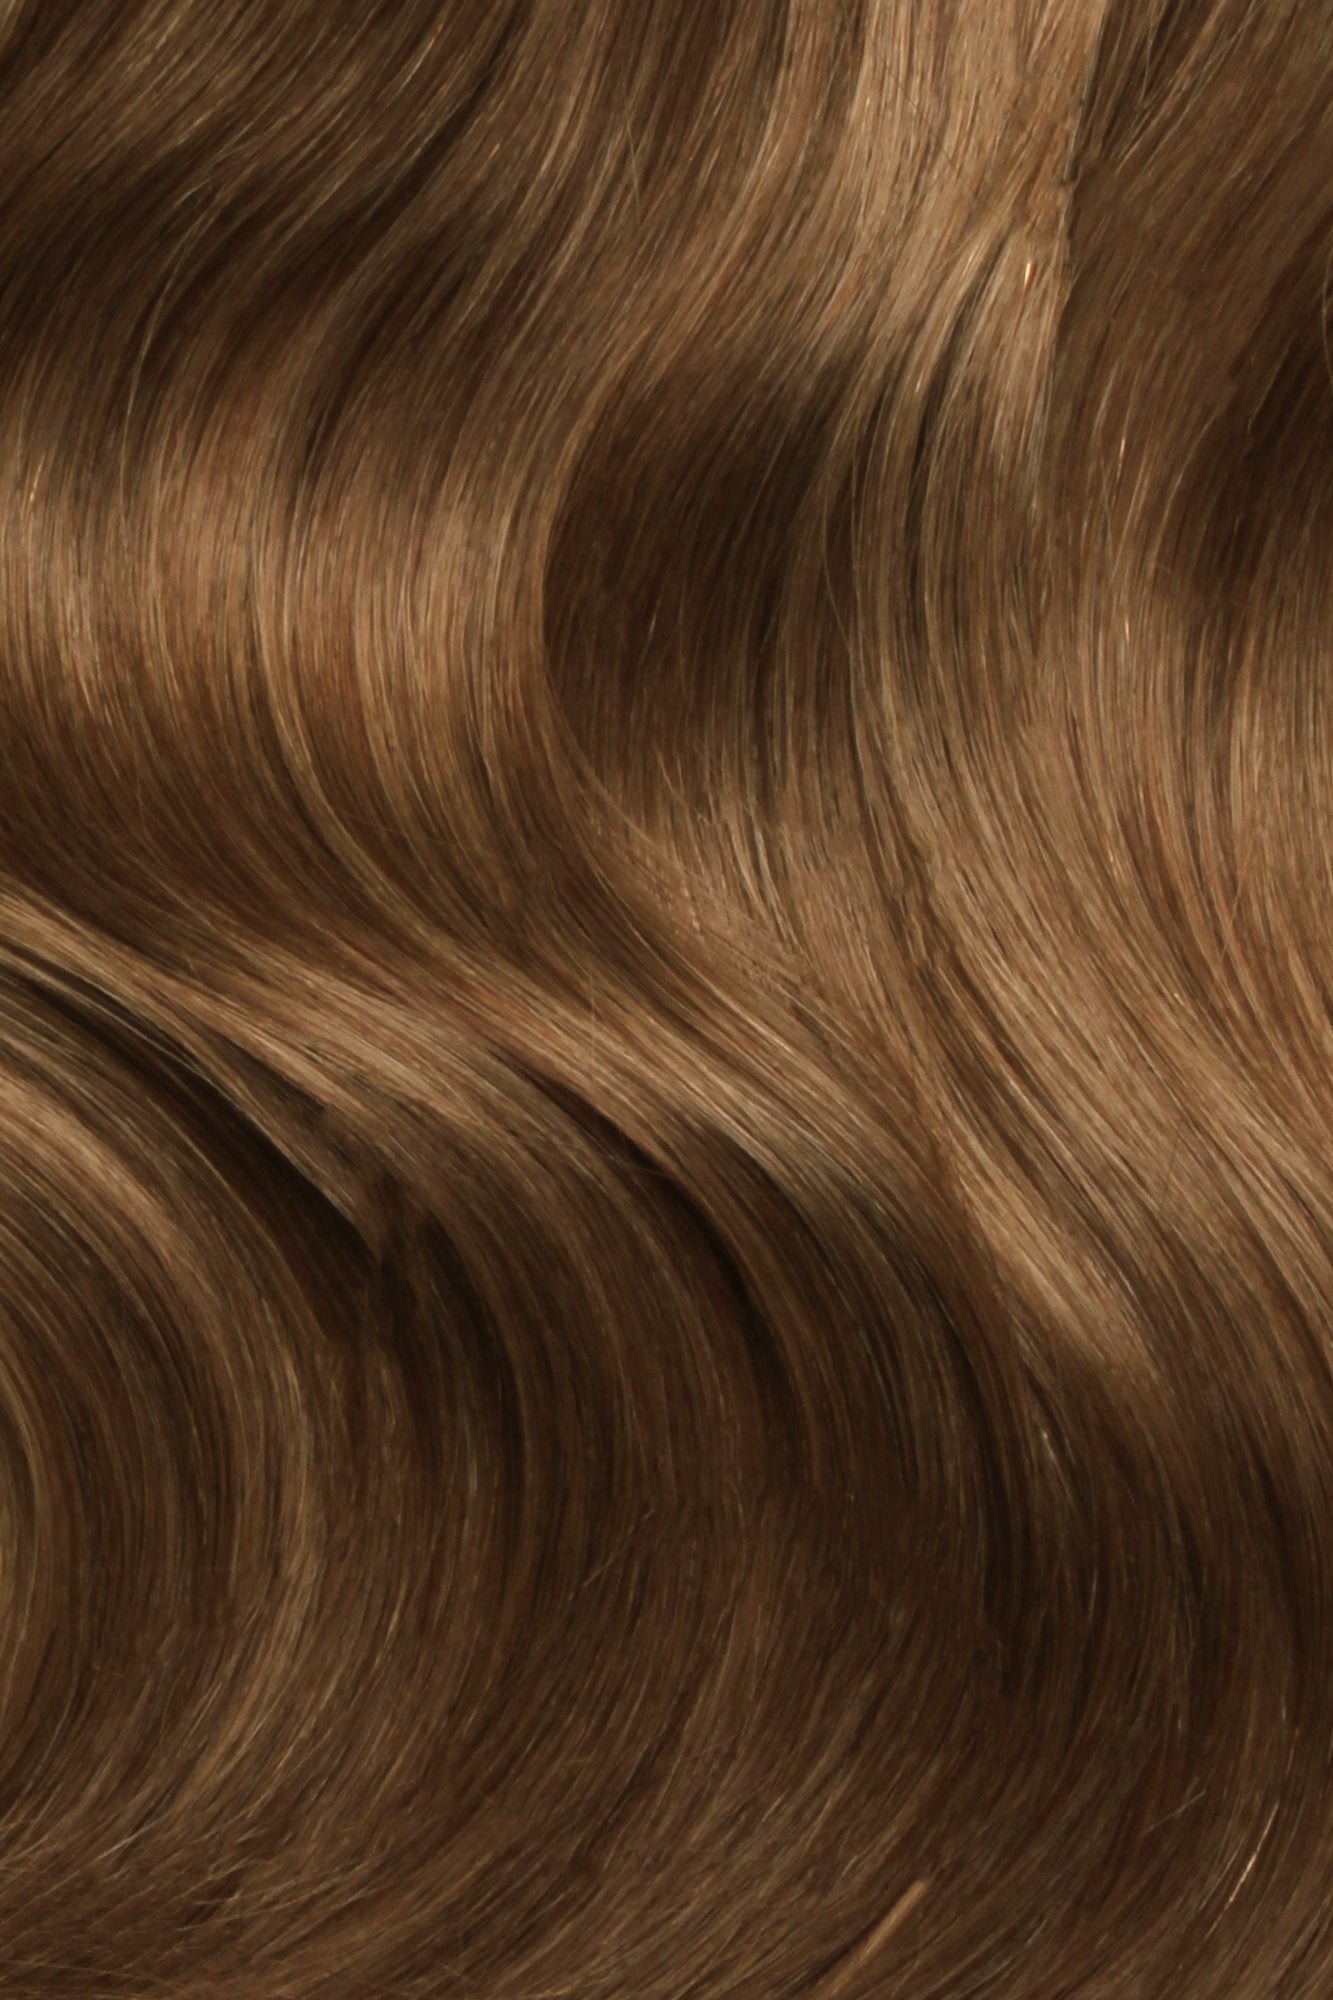 SEAMLESS® Flat Weft 20 Inches - SWAY Hair Extensions Chestnut-Brown-Mix-4-6 Natural SEAMLESS® Flat Weft 20 Inches extensions. Thin, flexible, and discreet. 100% Double Drawn Remy Human Hair. Versatile and reusable